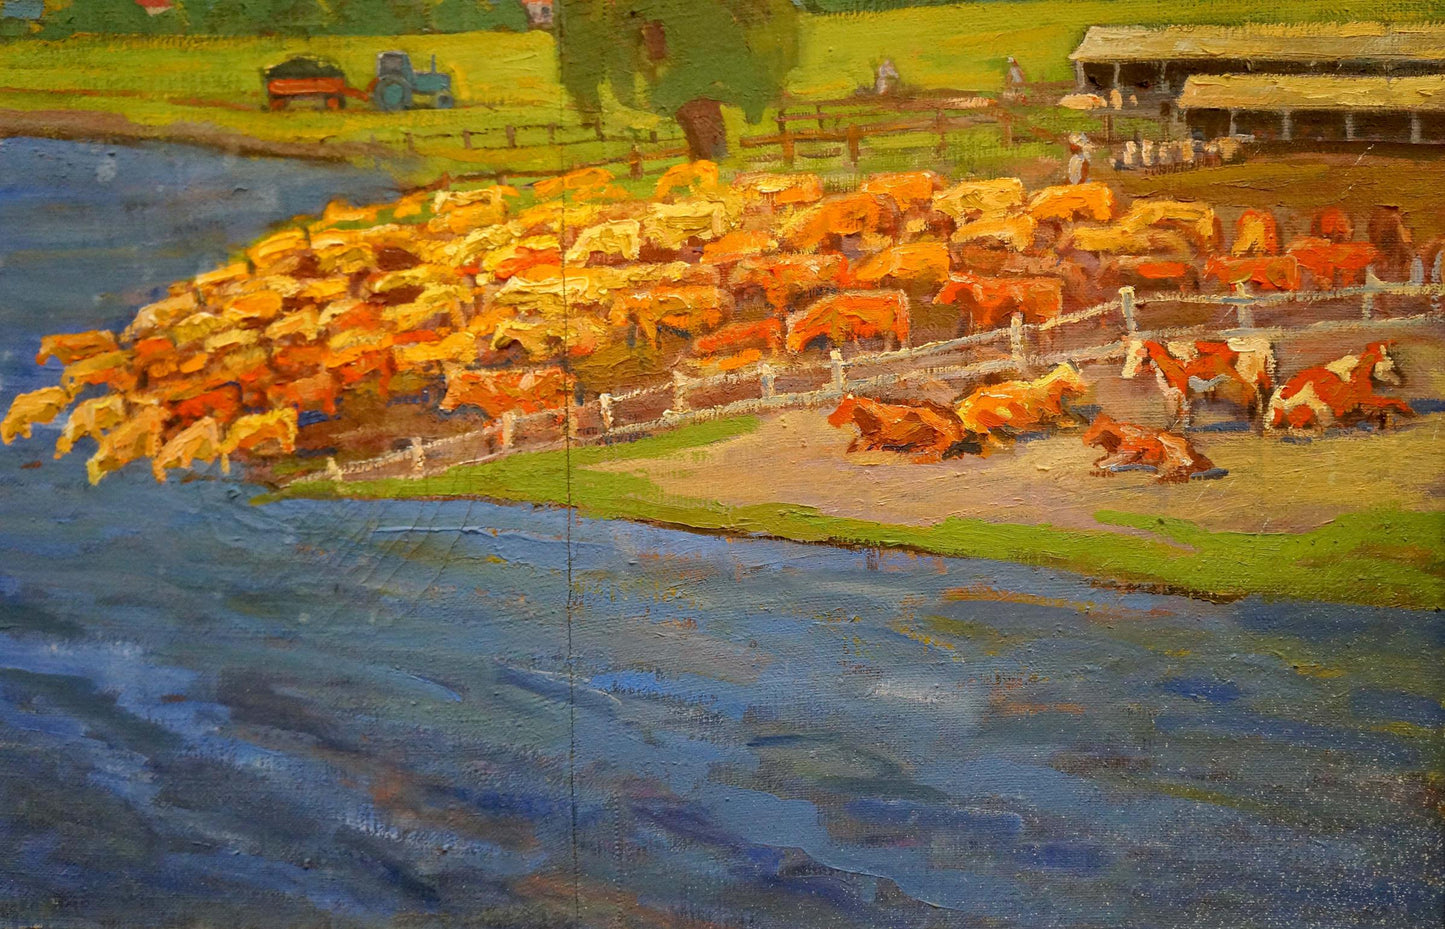 An unidentified artist's oil painting of cows near a river